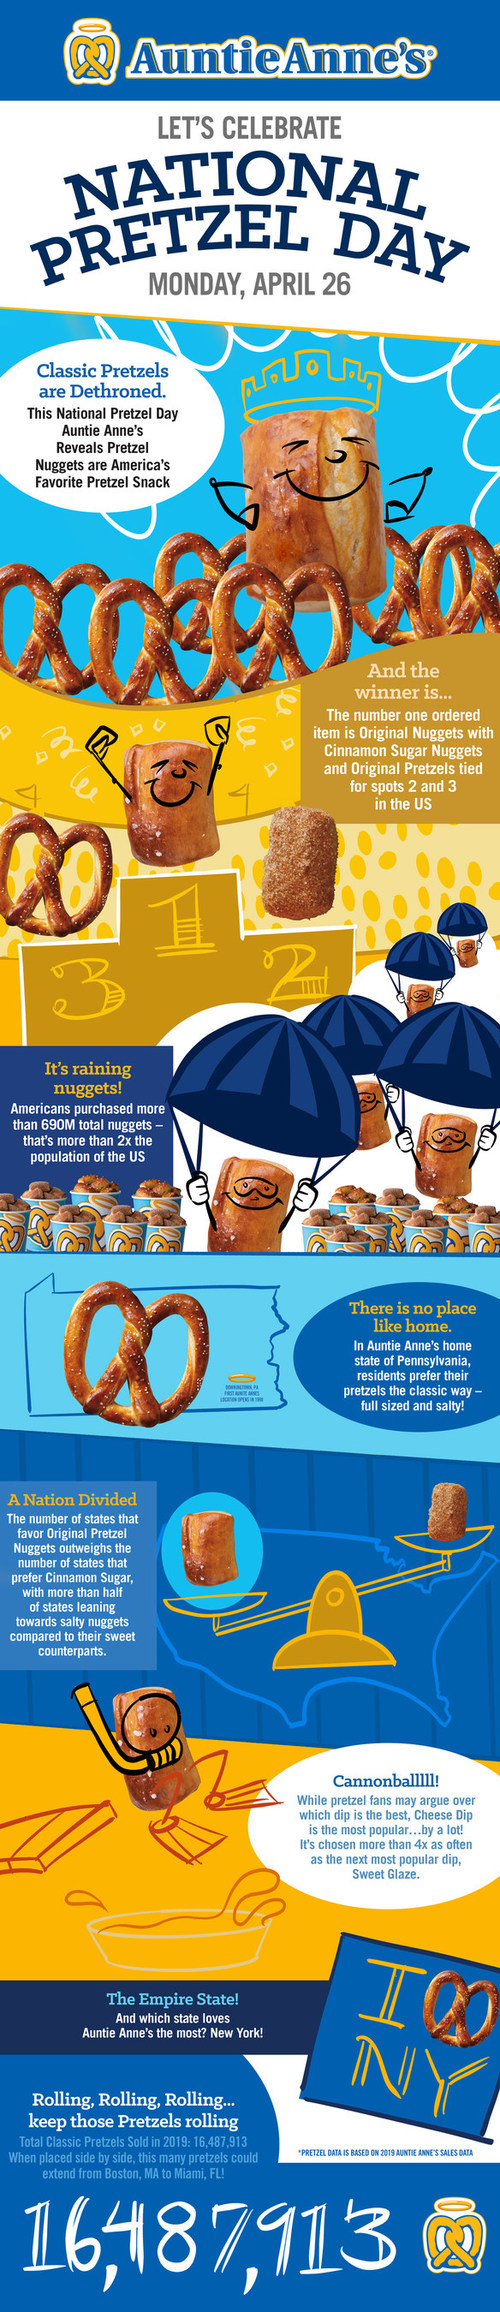 Auntie Anne's shares delicious data for National Pretzel Day